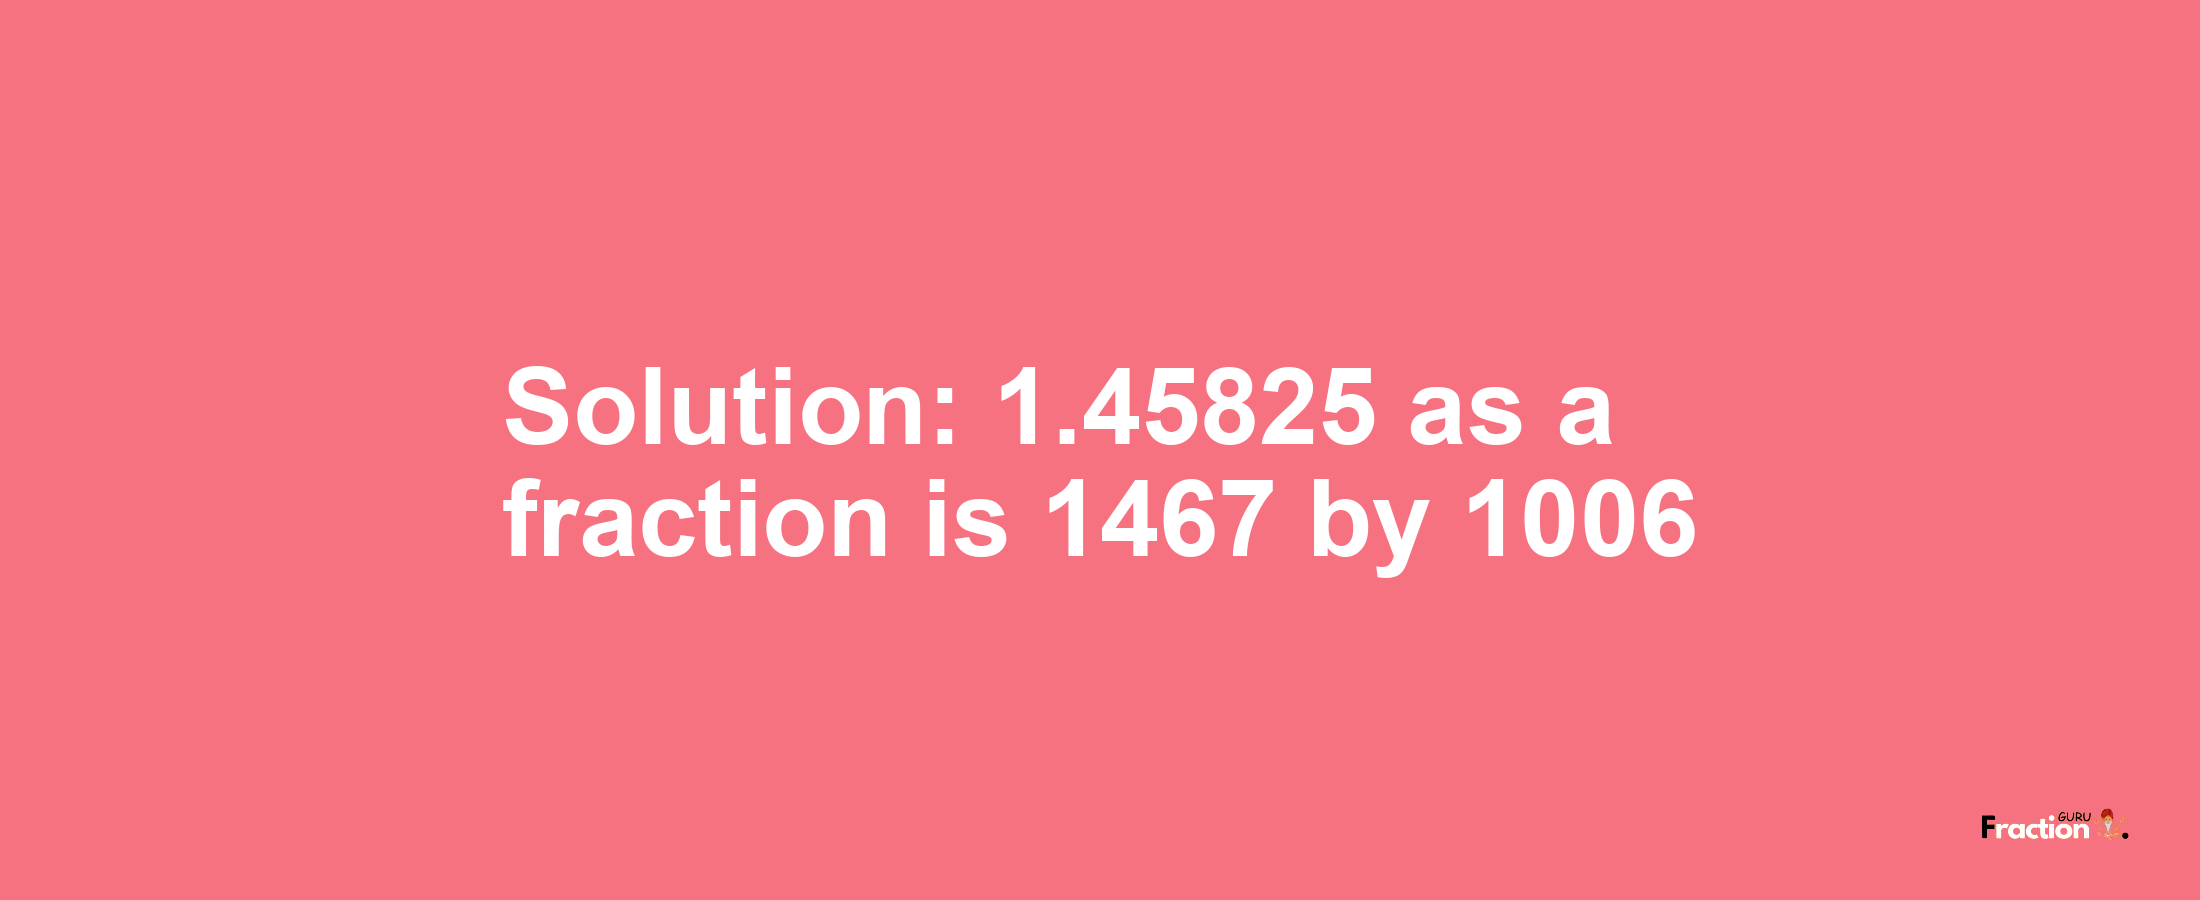 Solution:1.45825 as a fraction is 1467/1006